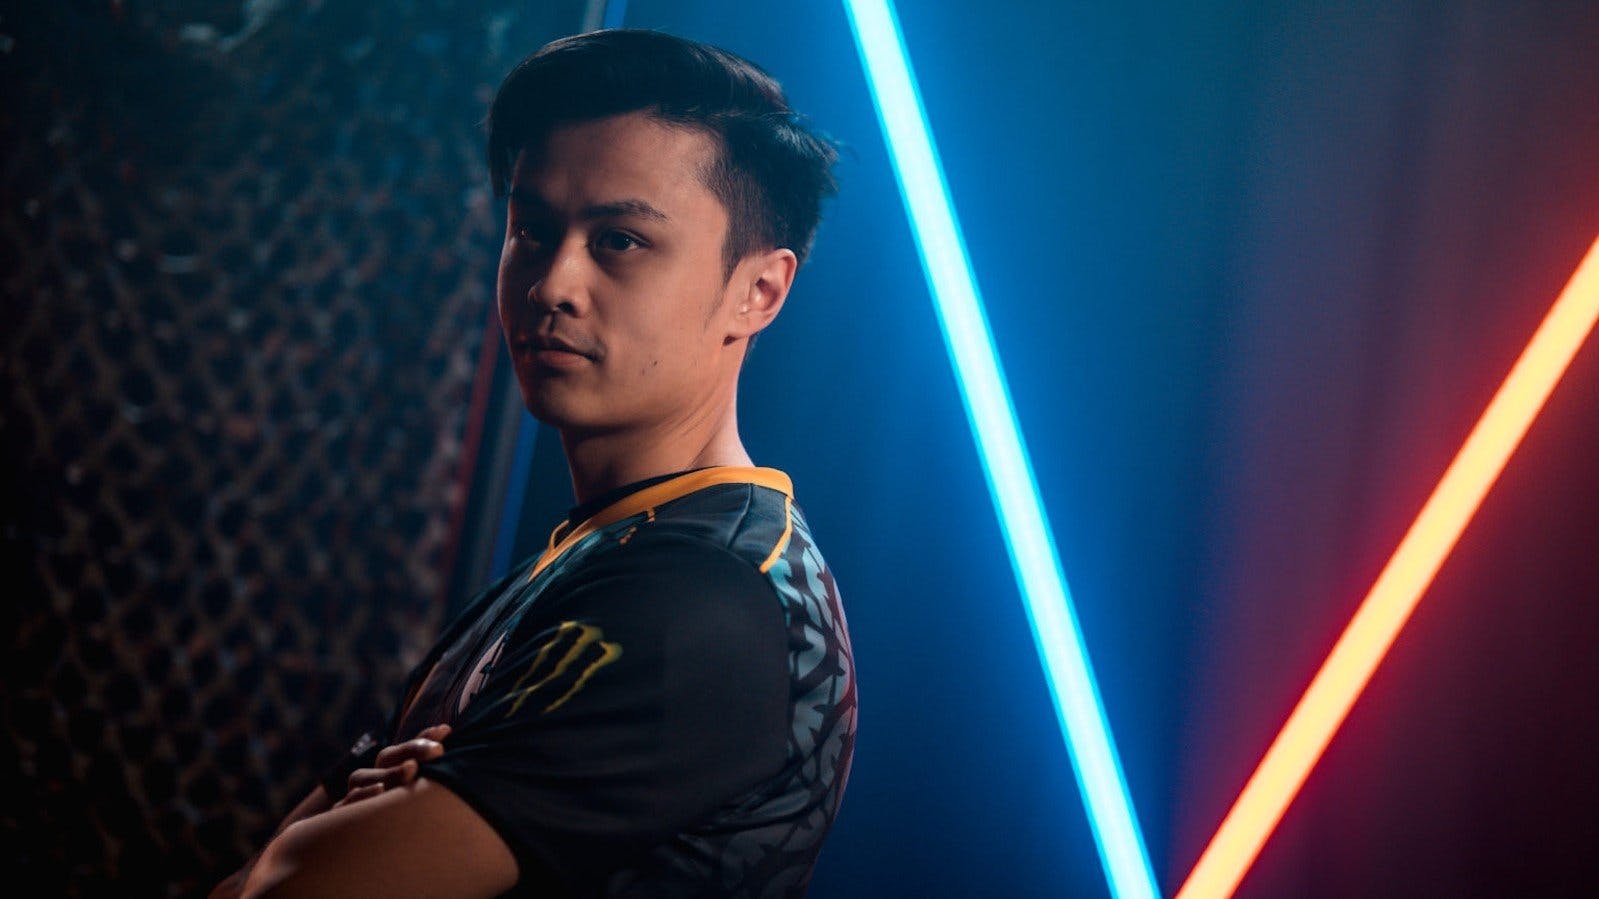 ‘I don’t really give a sh*t about EG CS’: Stewie2k unleashes on his former team